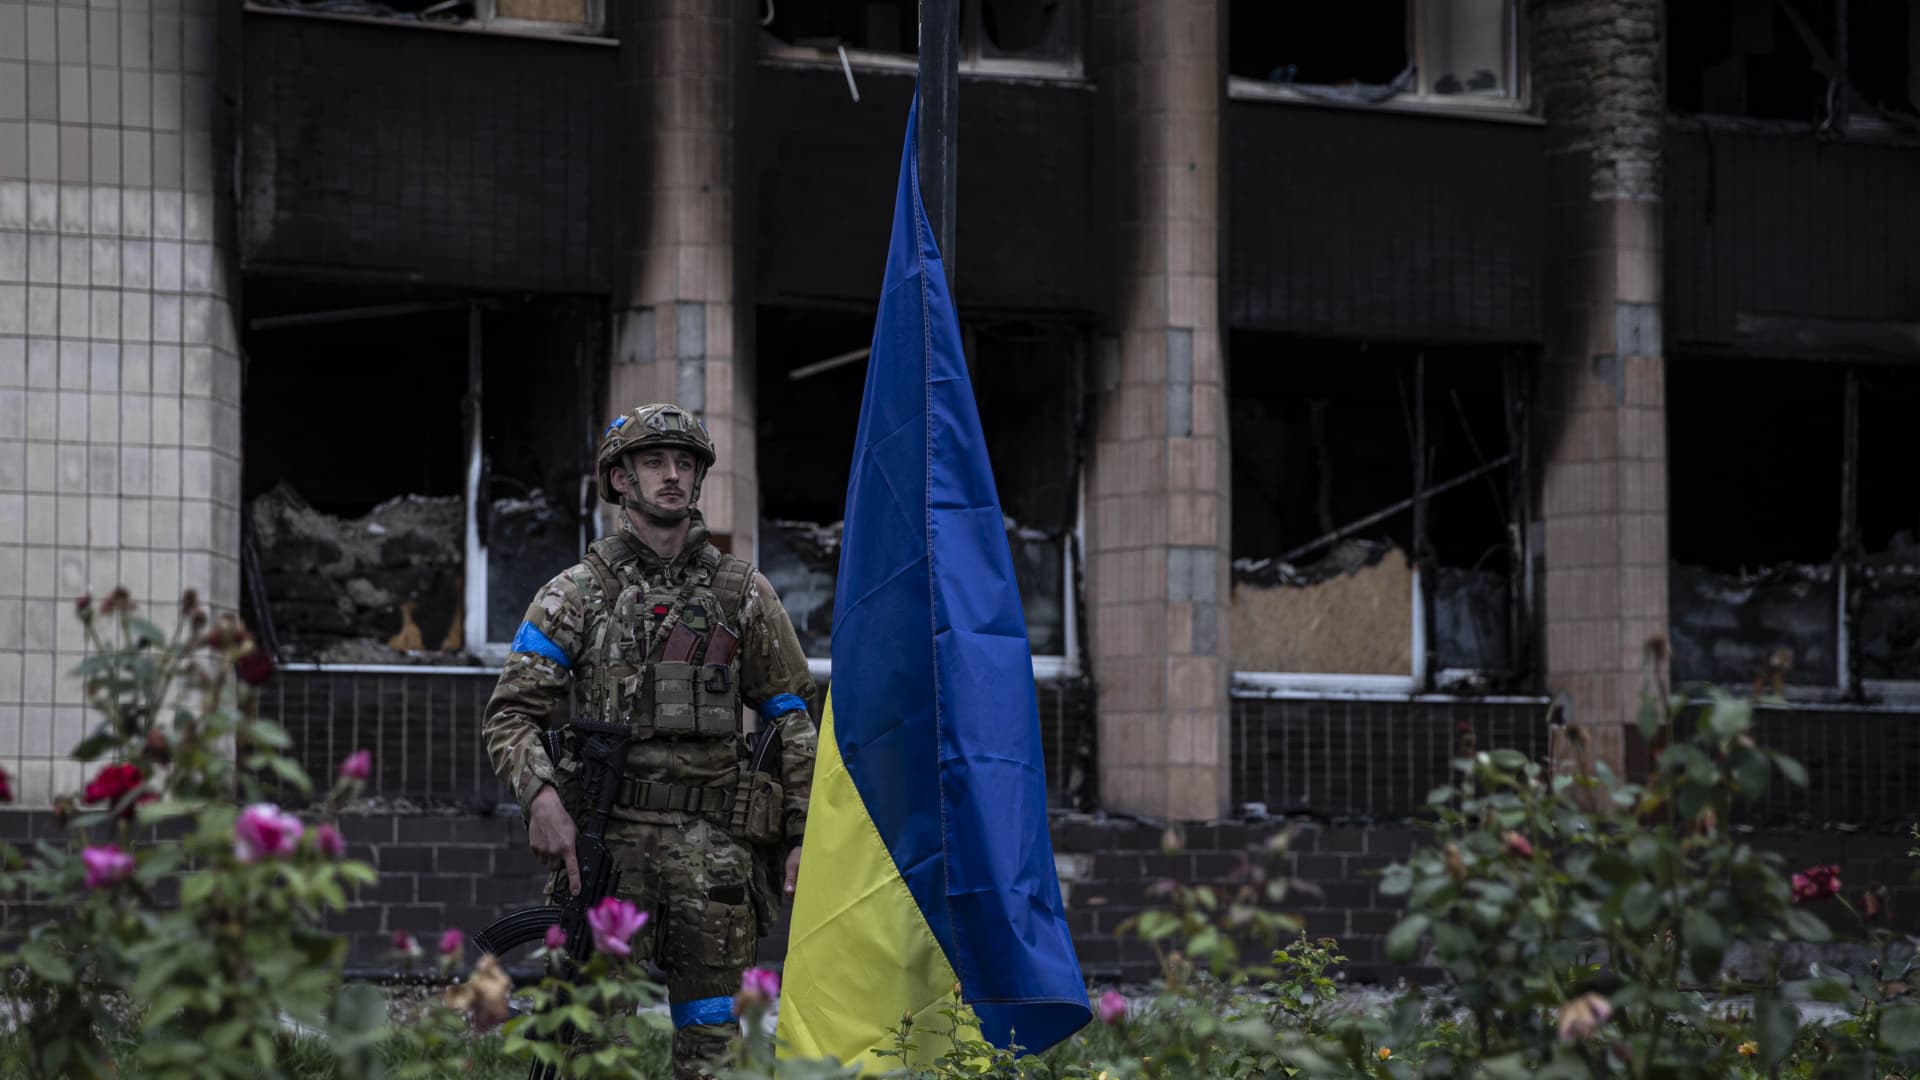 Ukrainian soldiers stand guard as Ukrainian President Volodymyr Zelenskyy attends flag hoisting ceremony in Izium after the Ukrainian forces took control of the city from the Russian forces in Kharkiv, Ukraine on September 14, 2022.